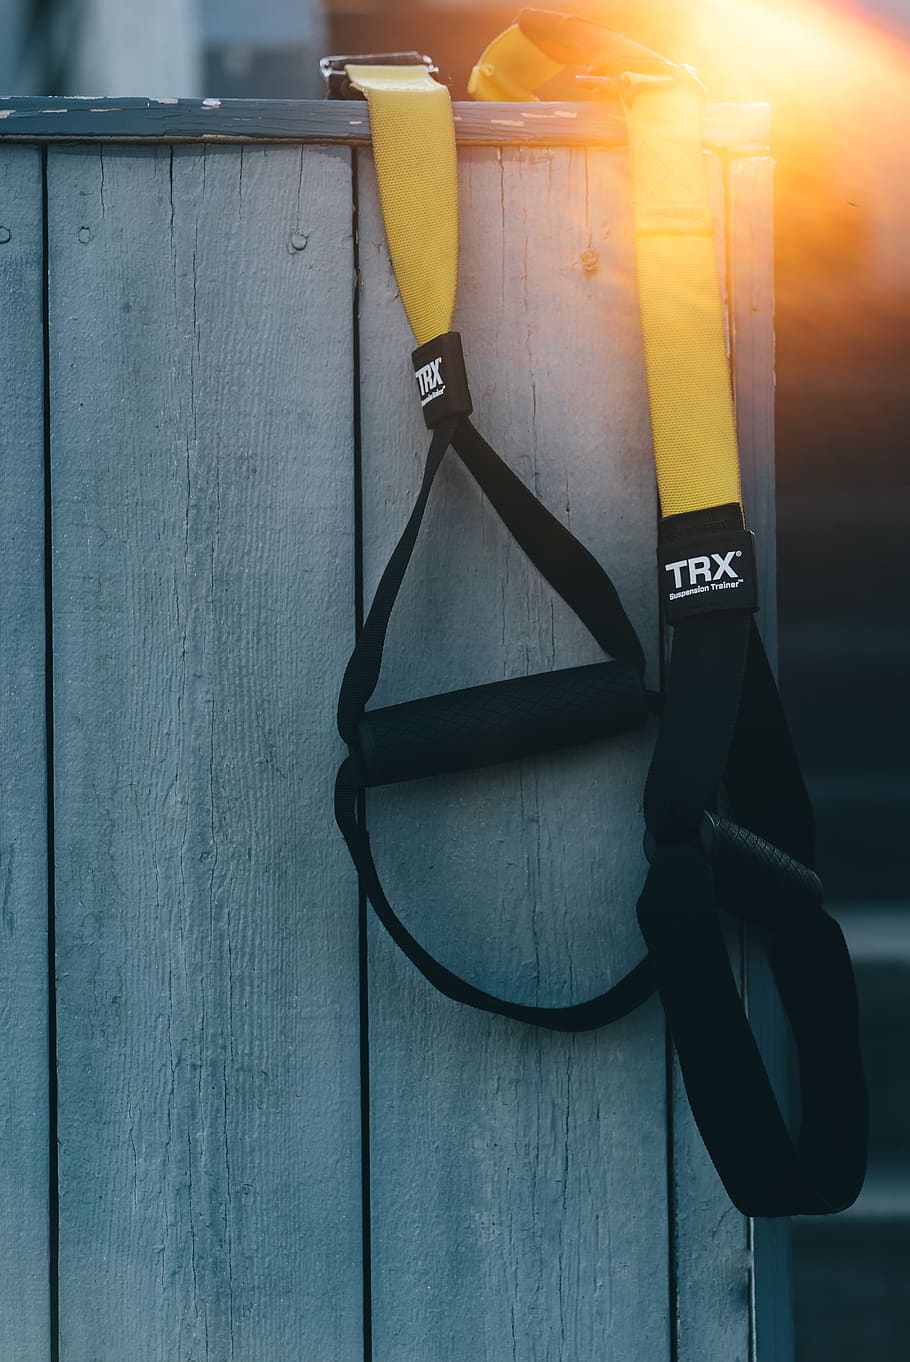 black and yellow TRX resistance band, communication, text, wood - material